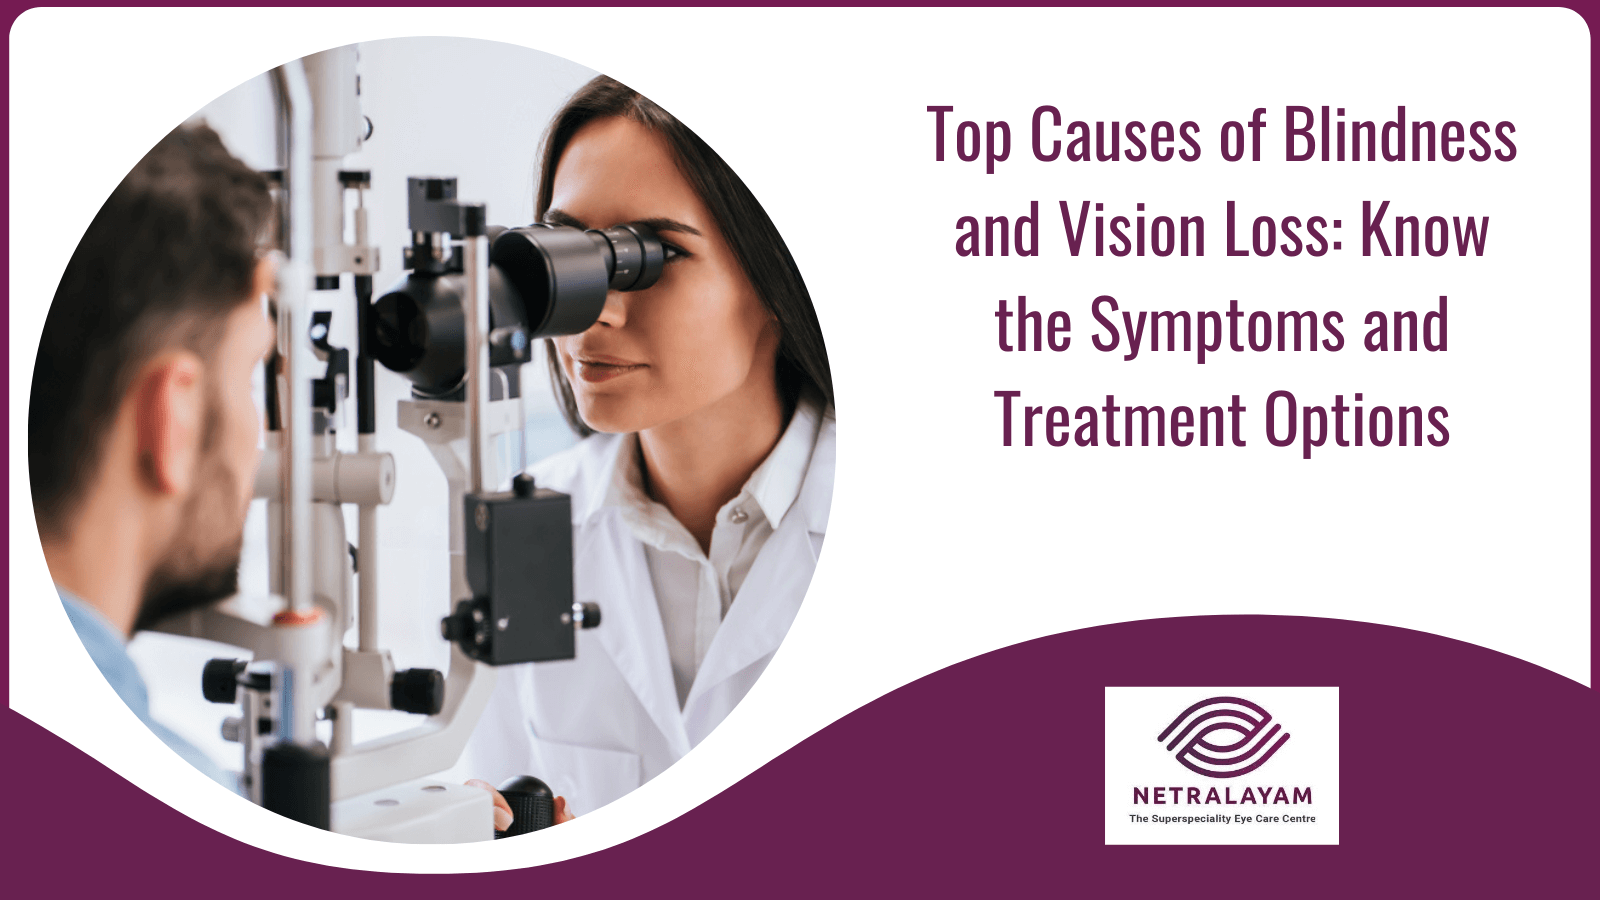 Top Causes of Blindness and Vision Loss: Know the Symptoms and Treatment Options